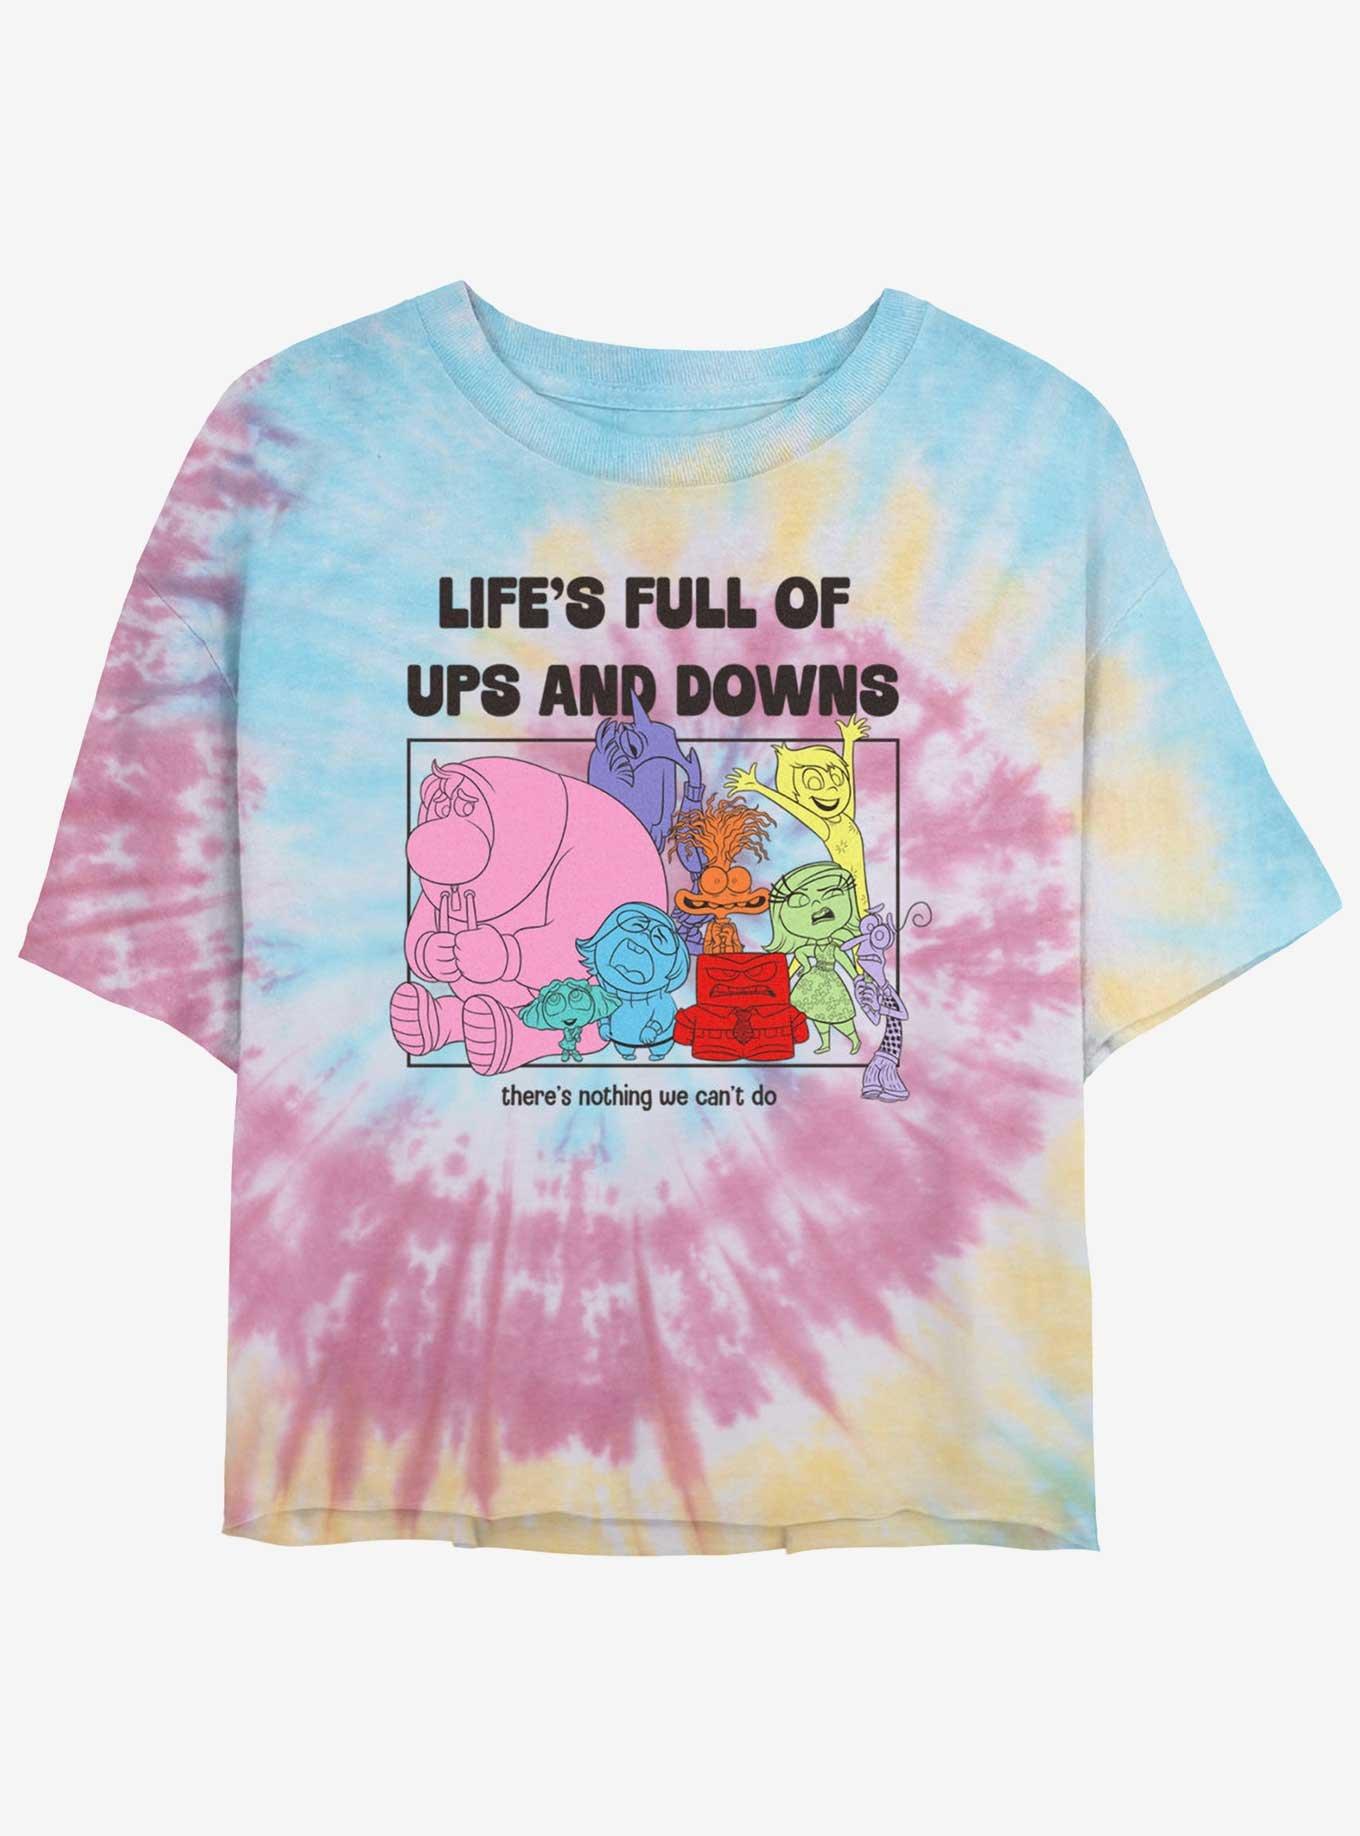 Disney Pixar Inside Out 2 Life's Full Of Ups And Downs Girls Tie-Dye Crop T-Shirt, BLUPNKLY, hi-res